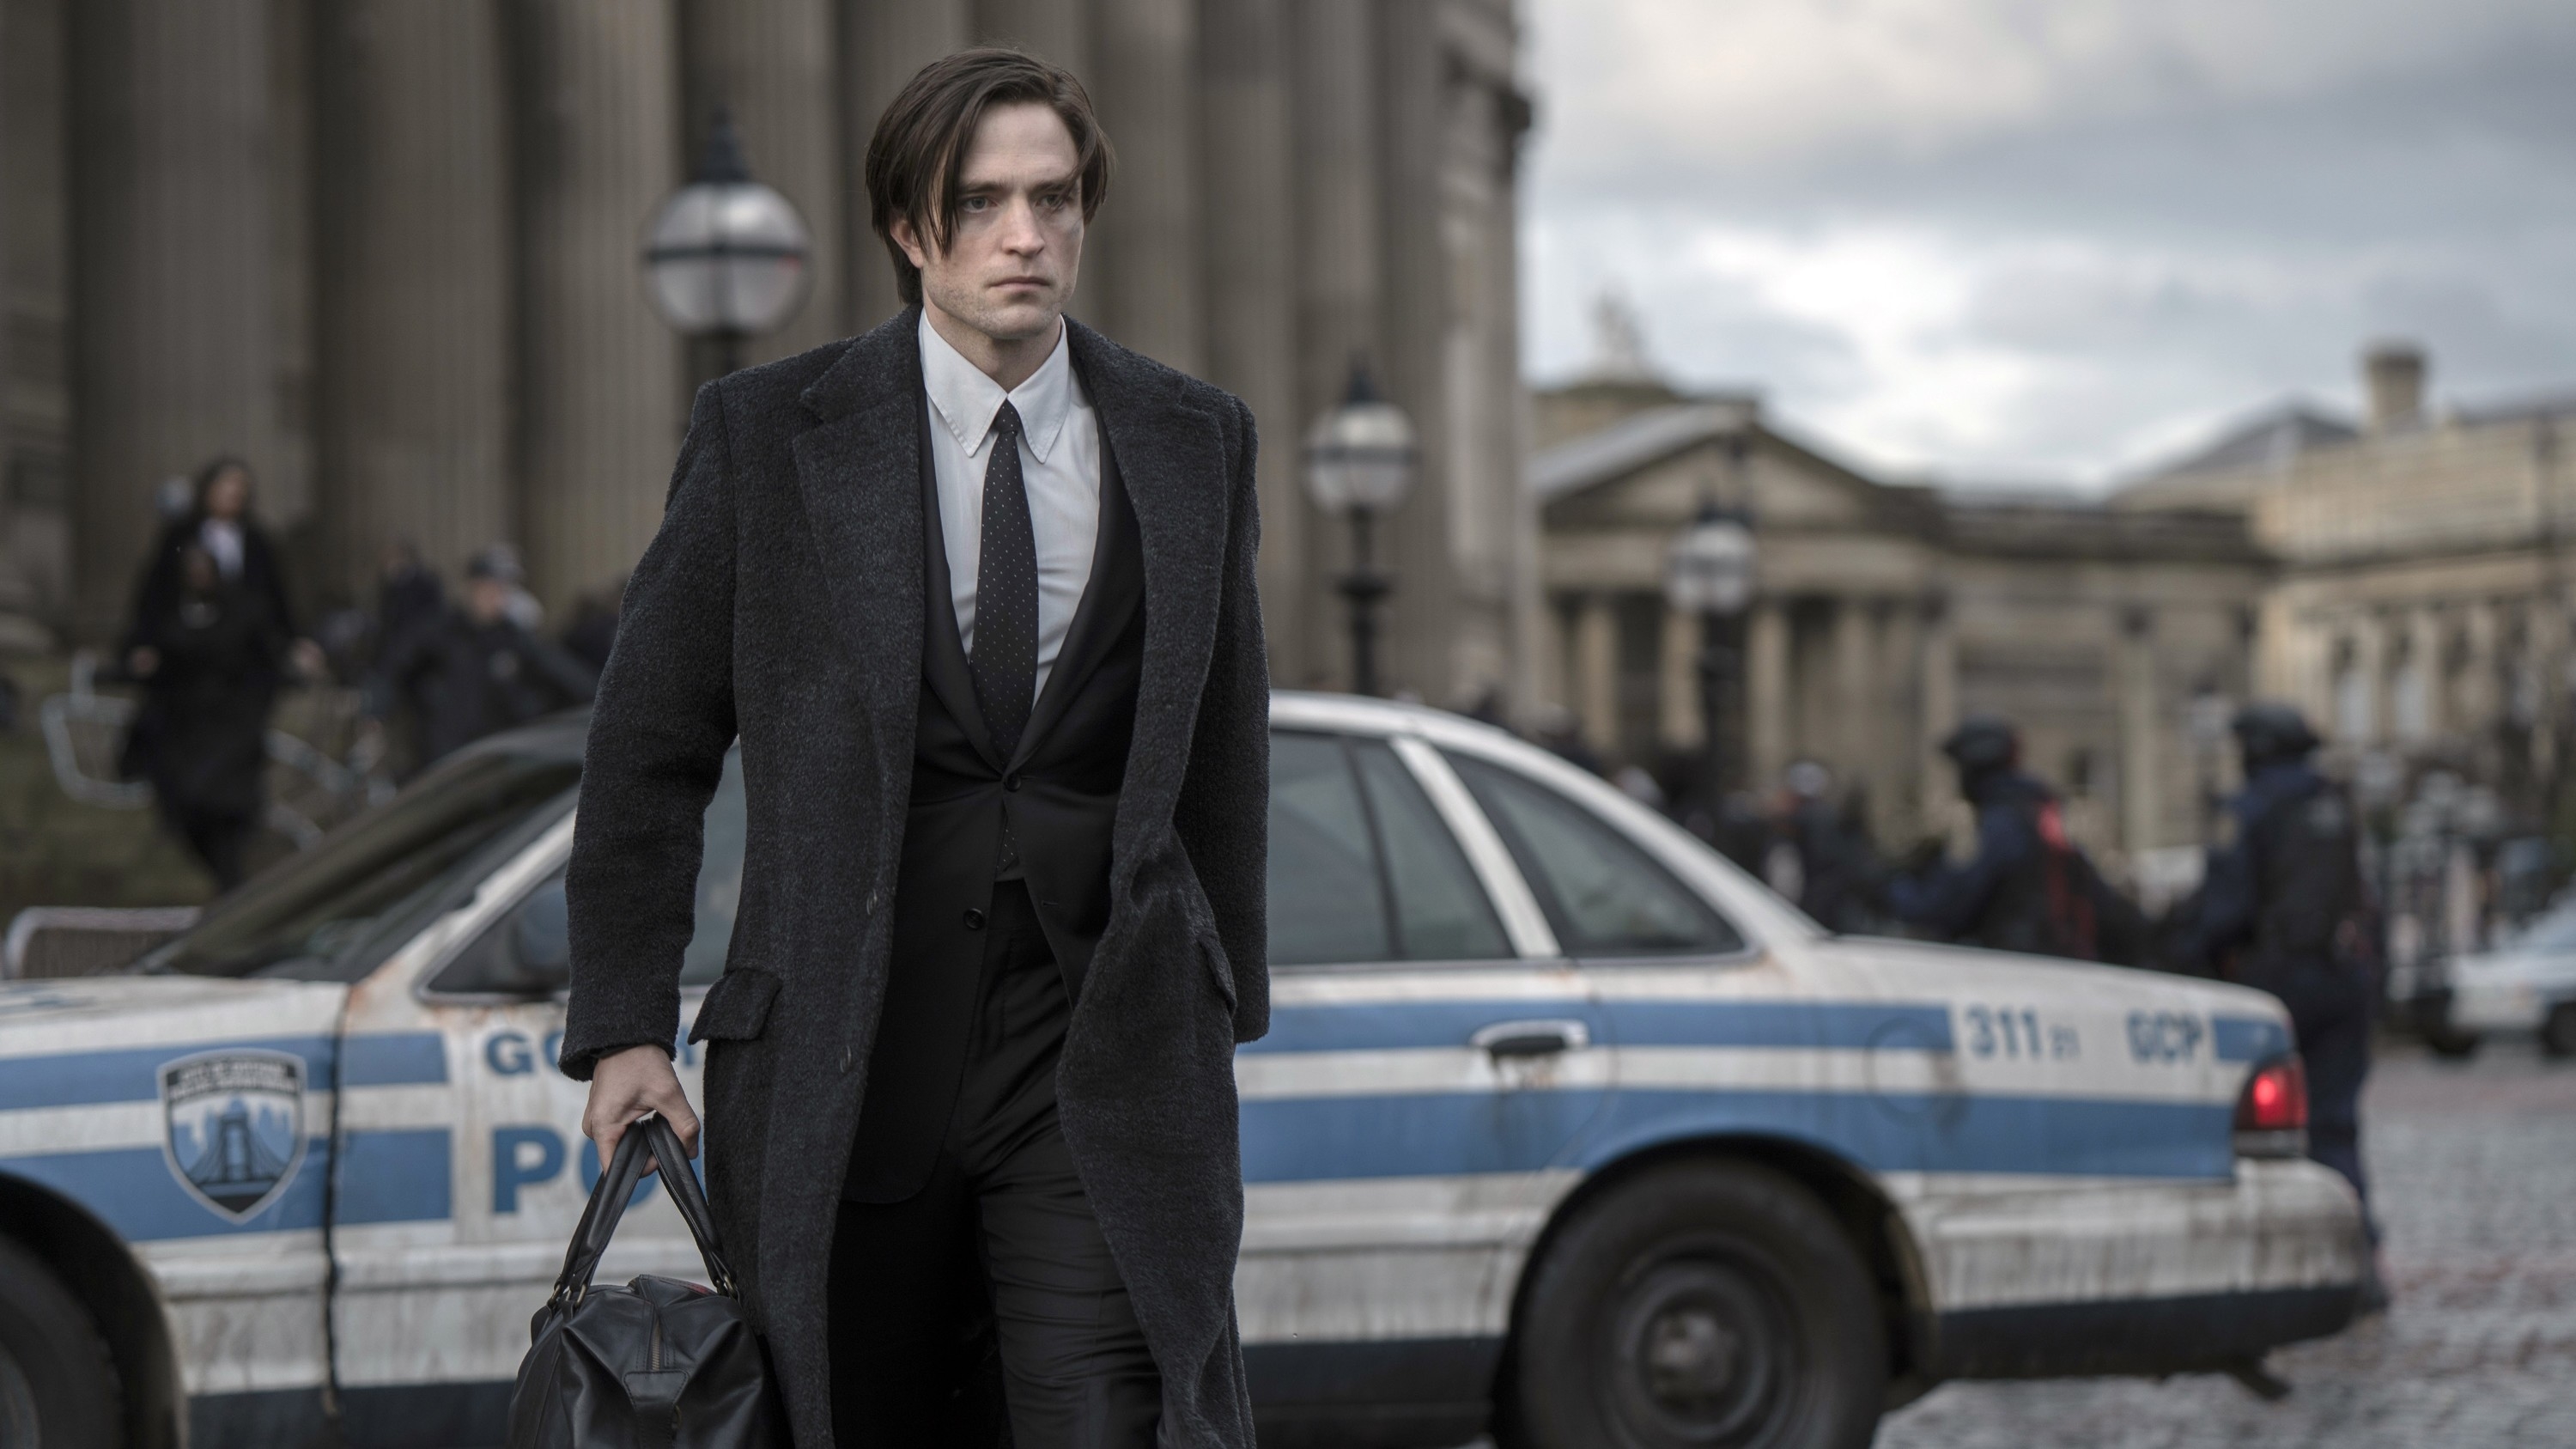 Robert Pattinson in a suit and overcoat walking in front of a police car and classical architecture